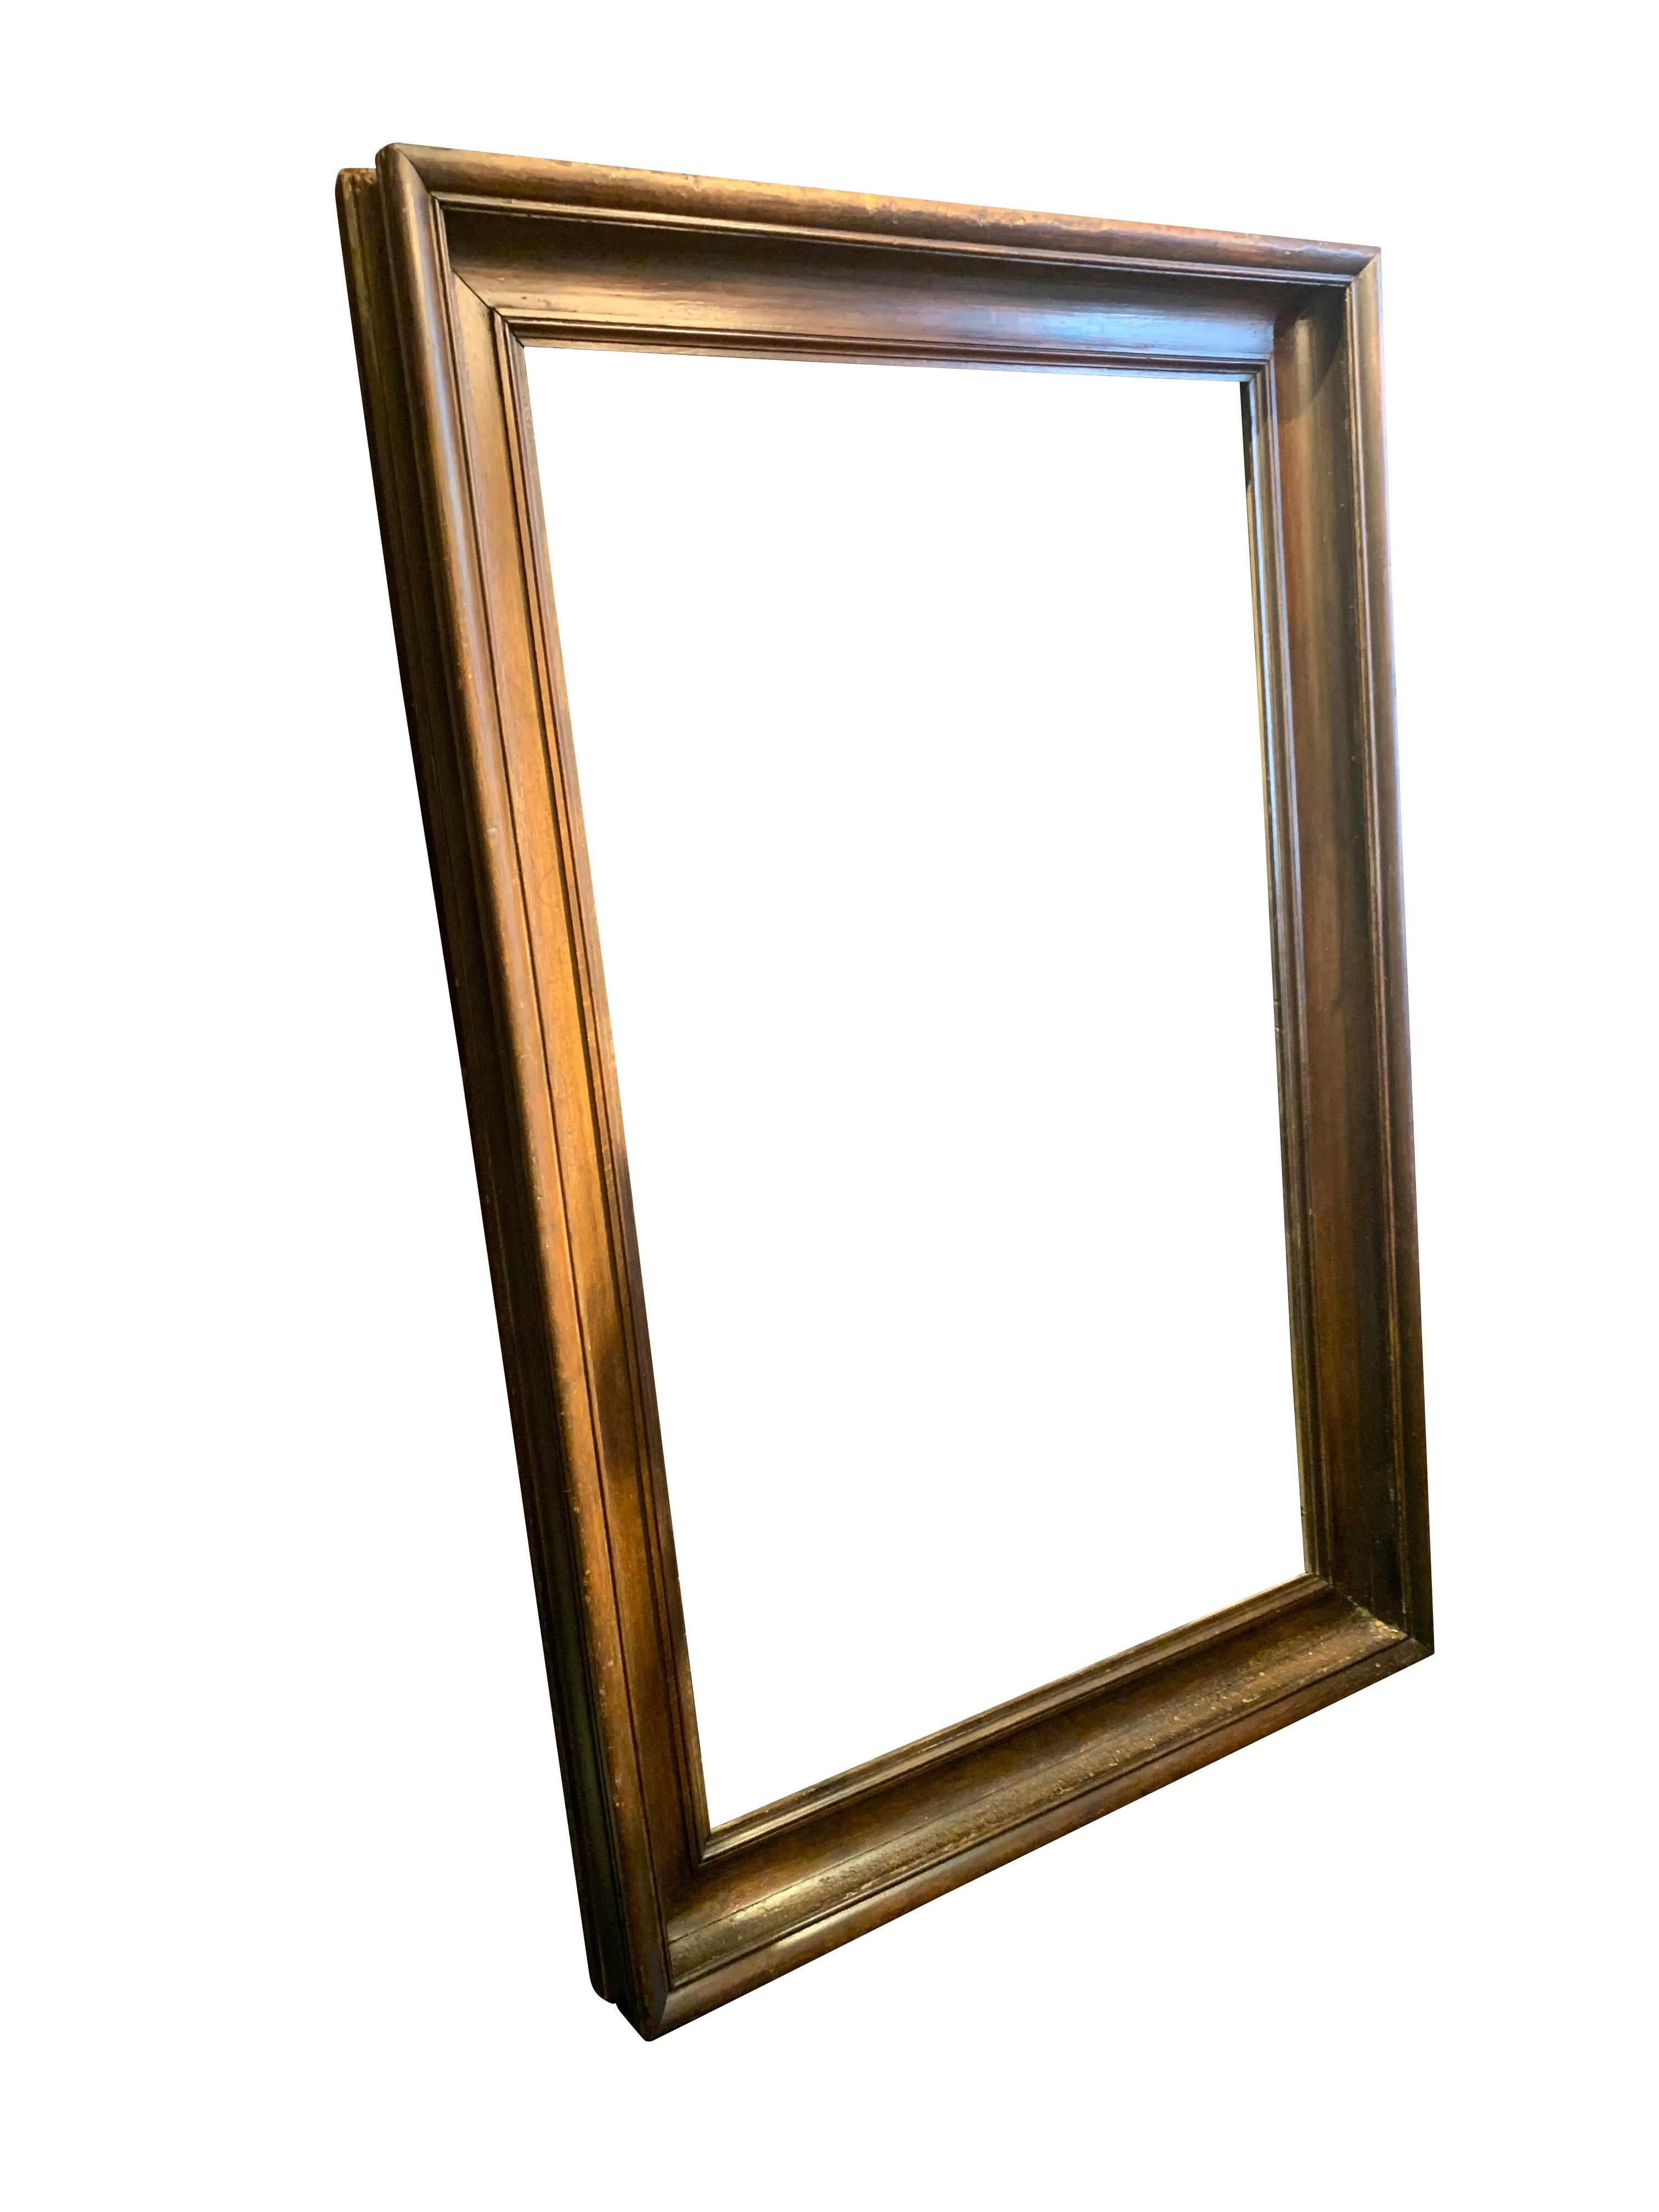 19th century French XL walnut frame.
Natural weathering and patina.
Recently restored.